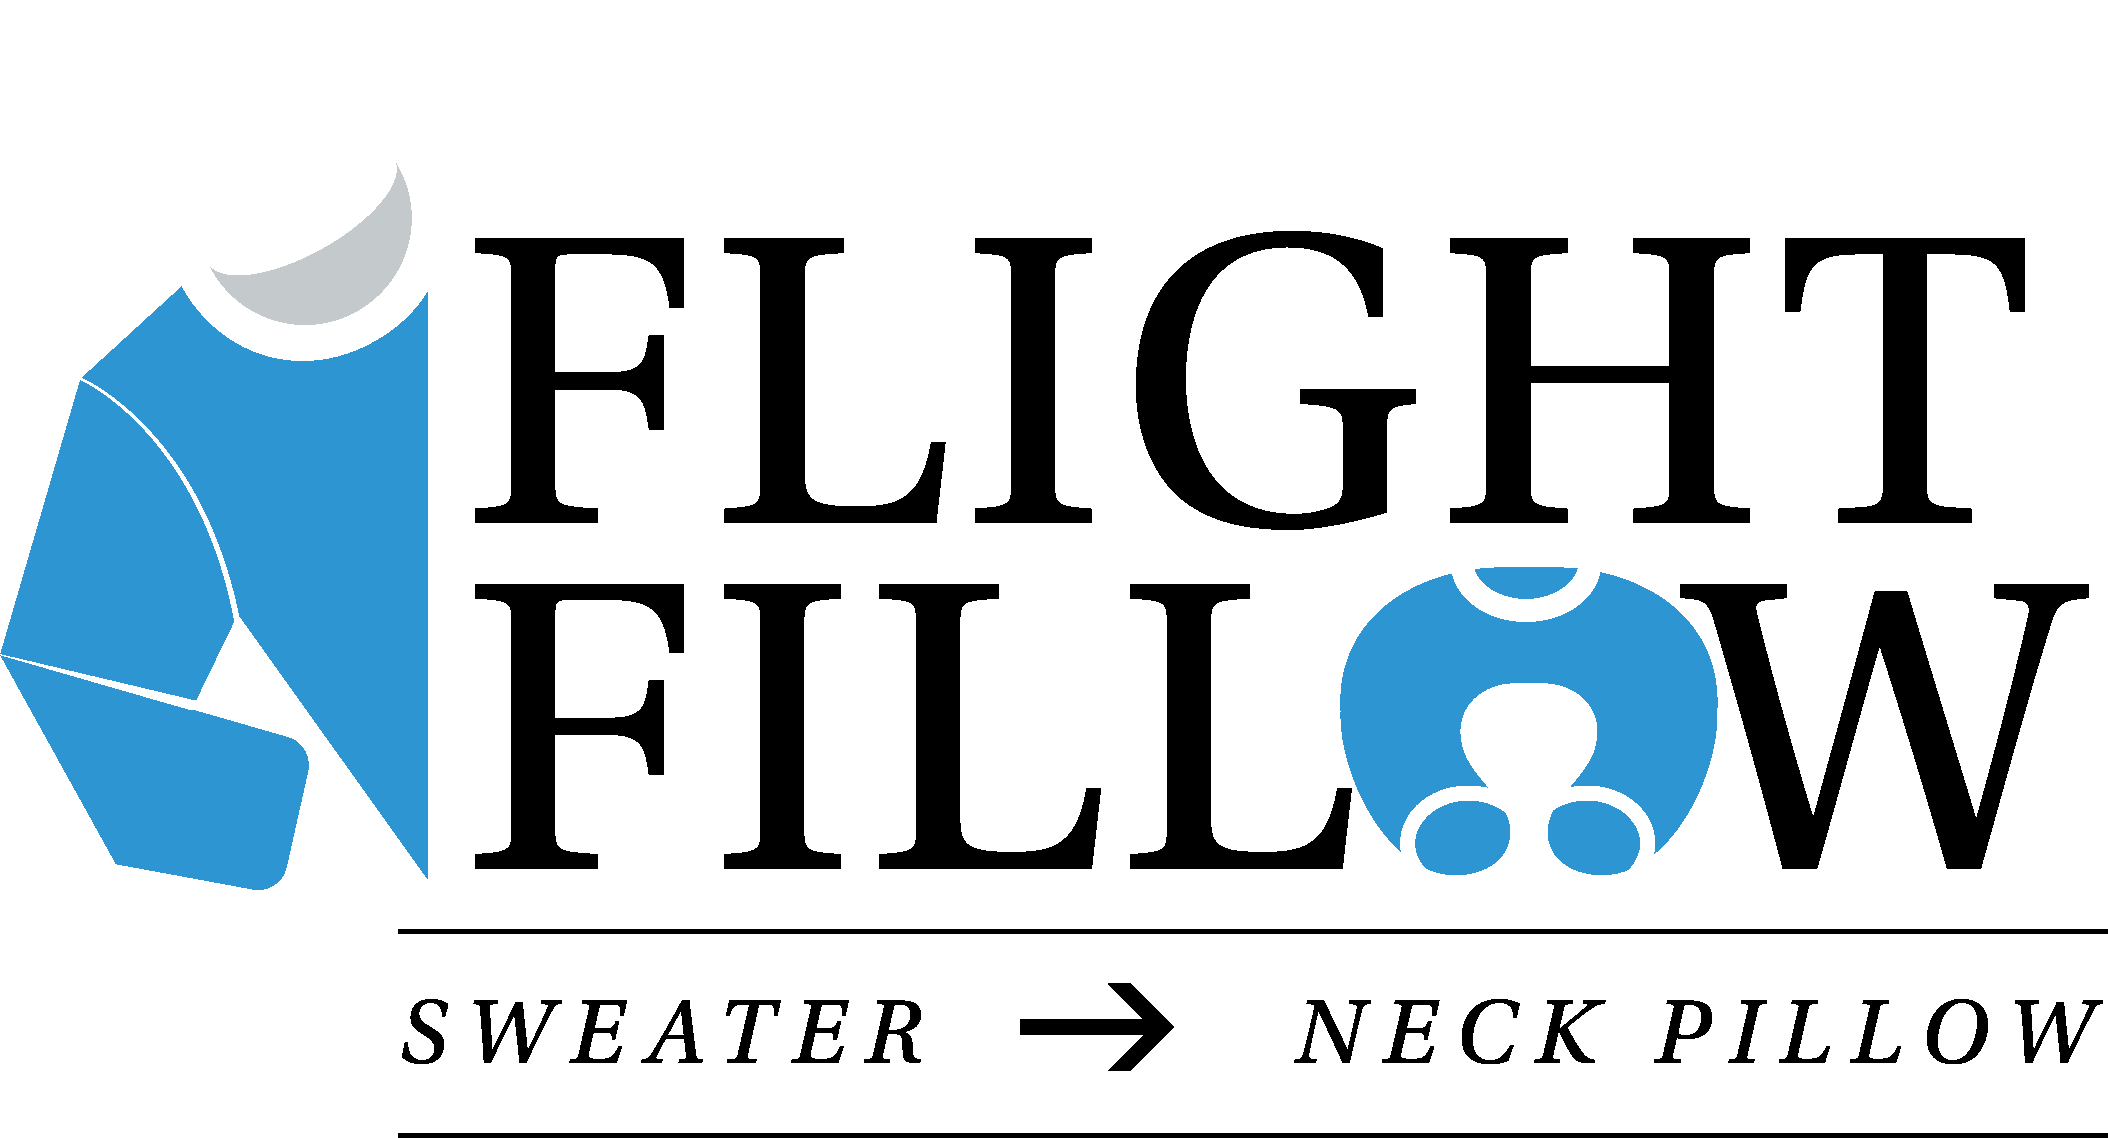 Watercolor Flight Fillow: Enhance your travel experience with our  Stuffable, Machine Washable, Lumbar Support Travel Pillow for Plane and Car